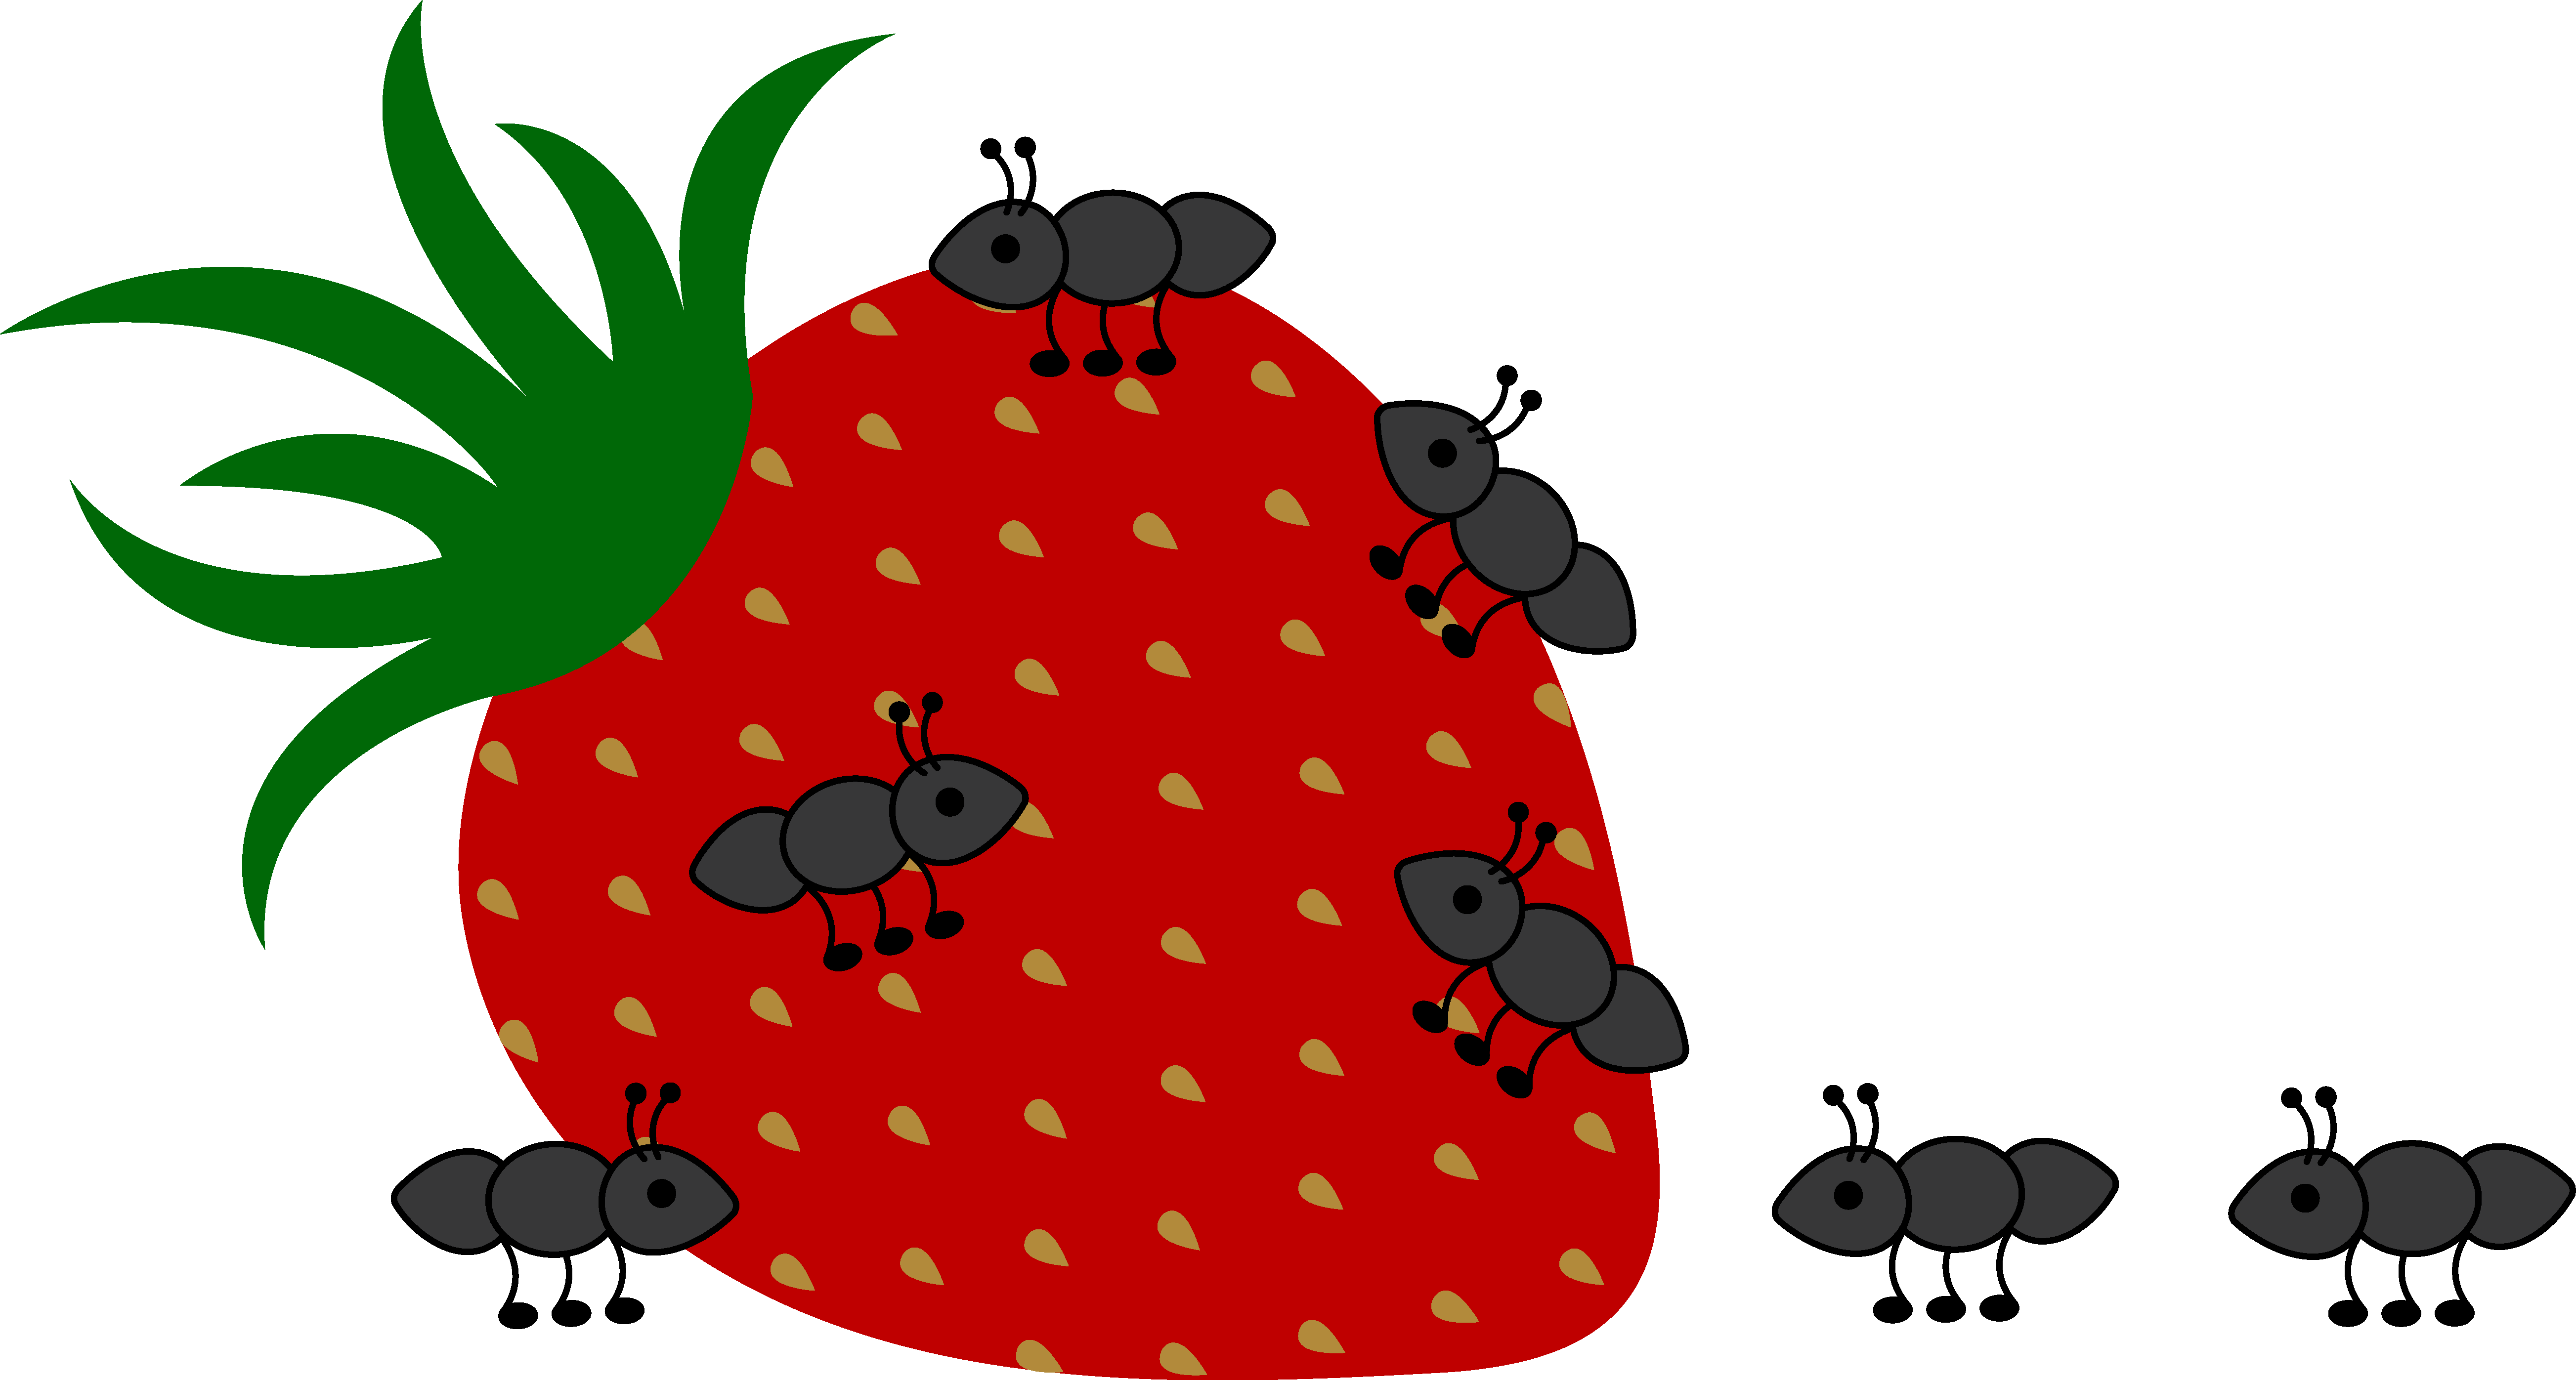 Ants Crawling On Strawberry - Sad Quotes About Love (5212x2793)